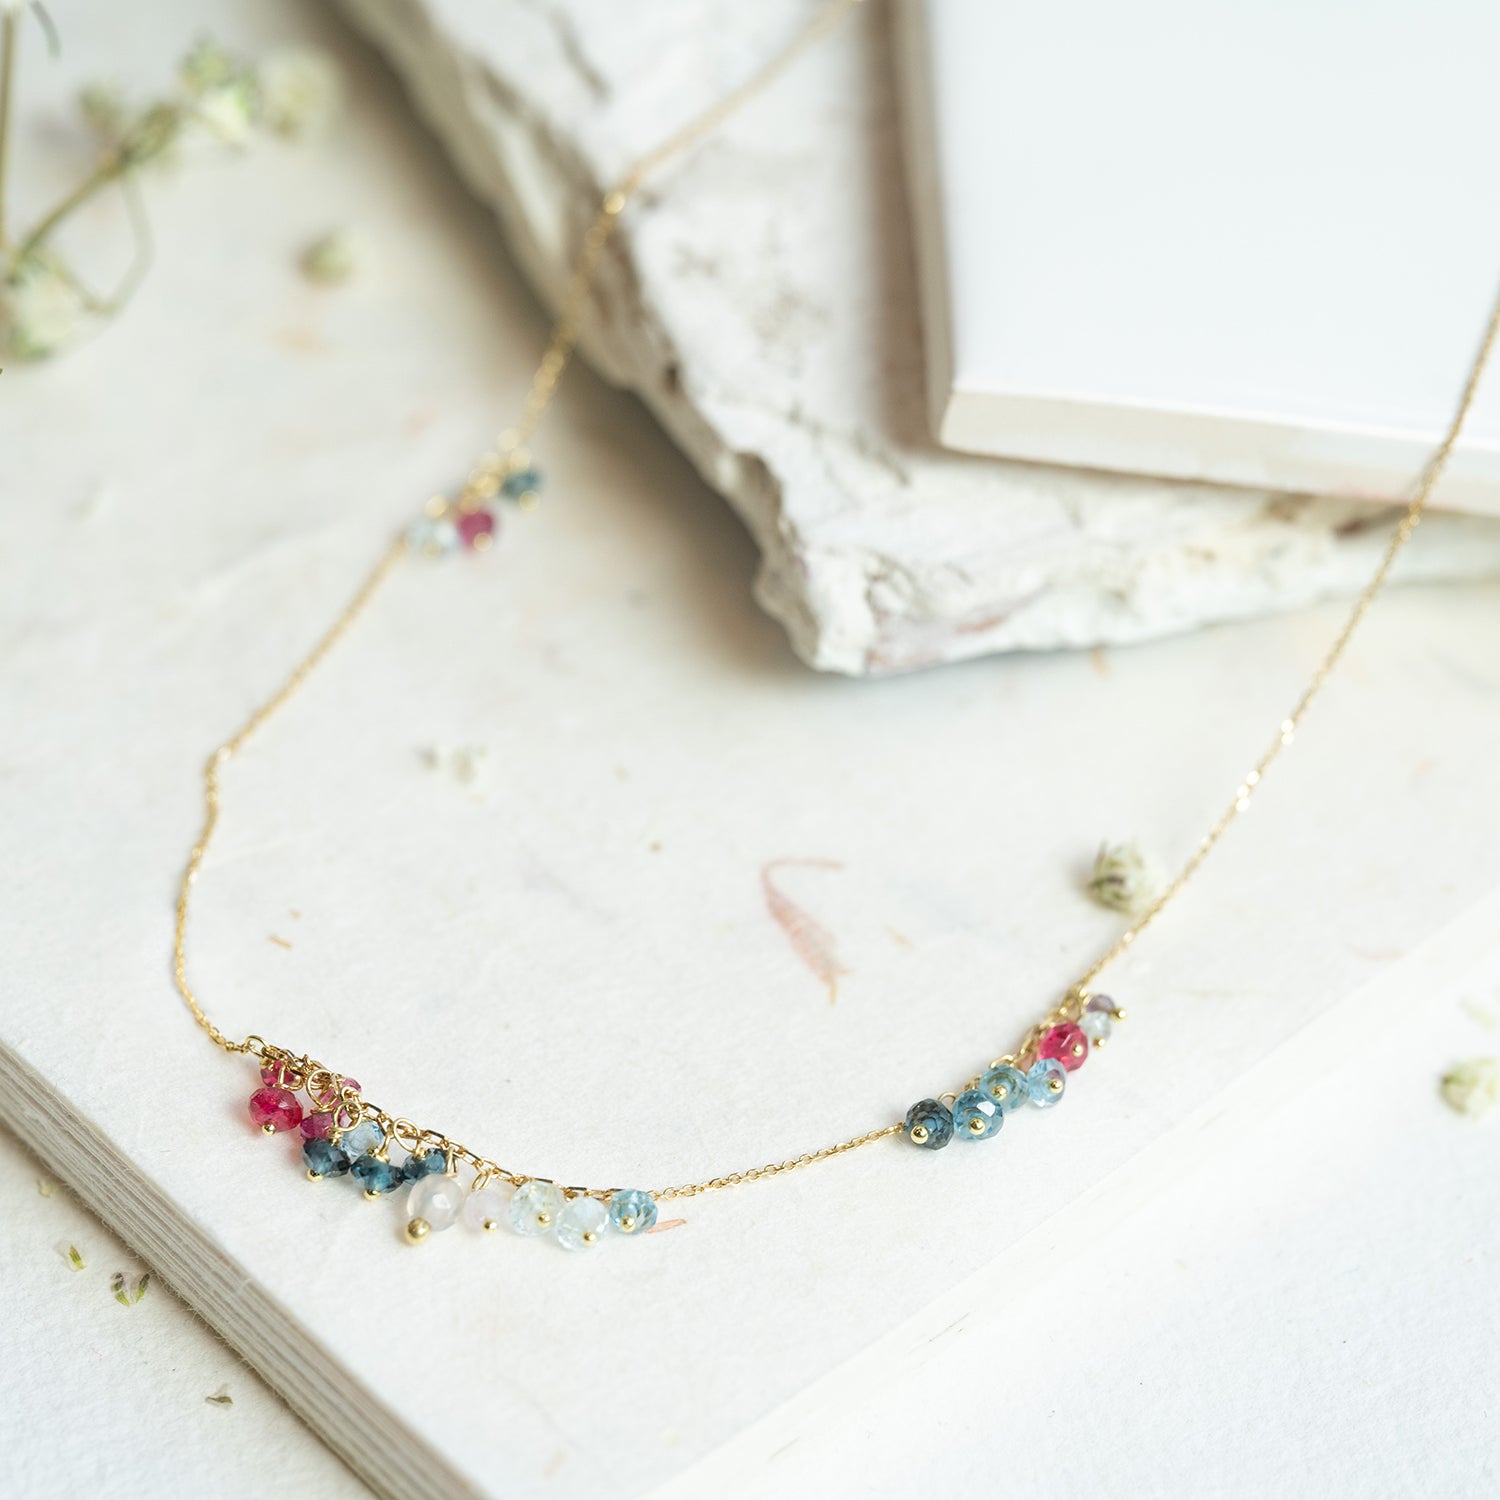 18ct yellow gold fine chain necklace from our 'Oh I Do Like to be Beside the Seaside' collection has clusters of Red Spinel, Pink Tourmaline and mixed Blue Topaz beads.